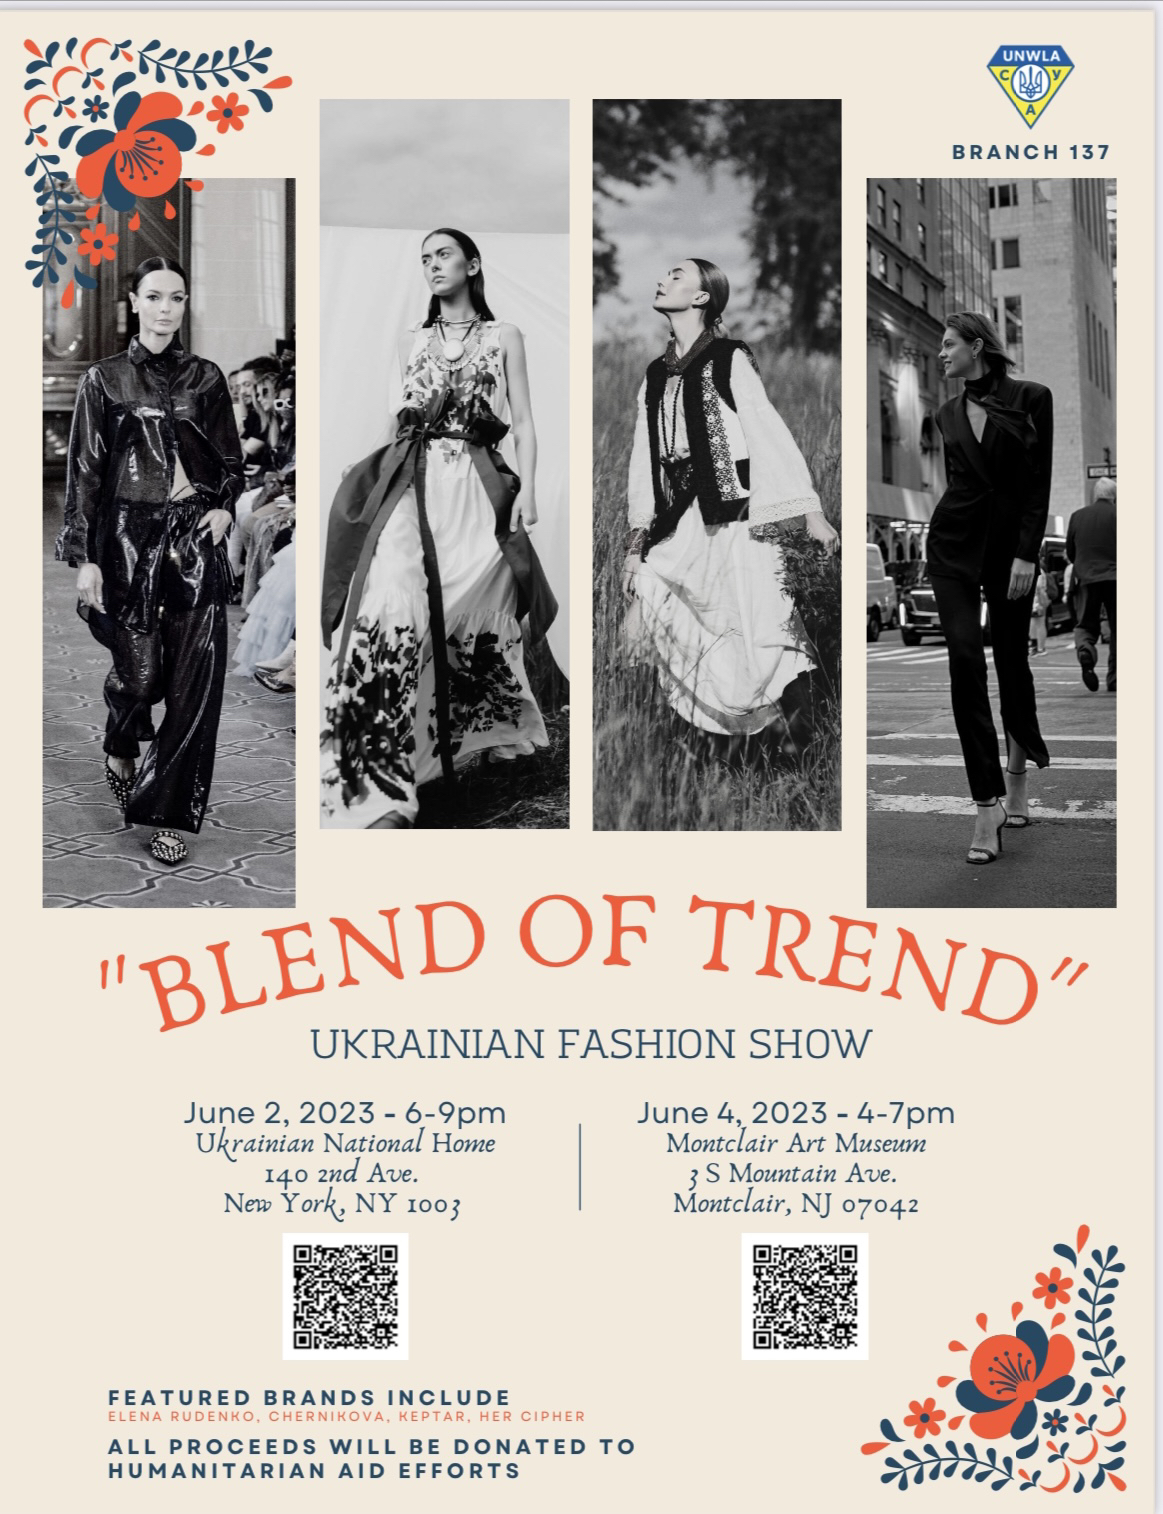 published blend of trend full | UNWLA - Ukrainian National Womens League of America